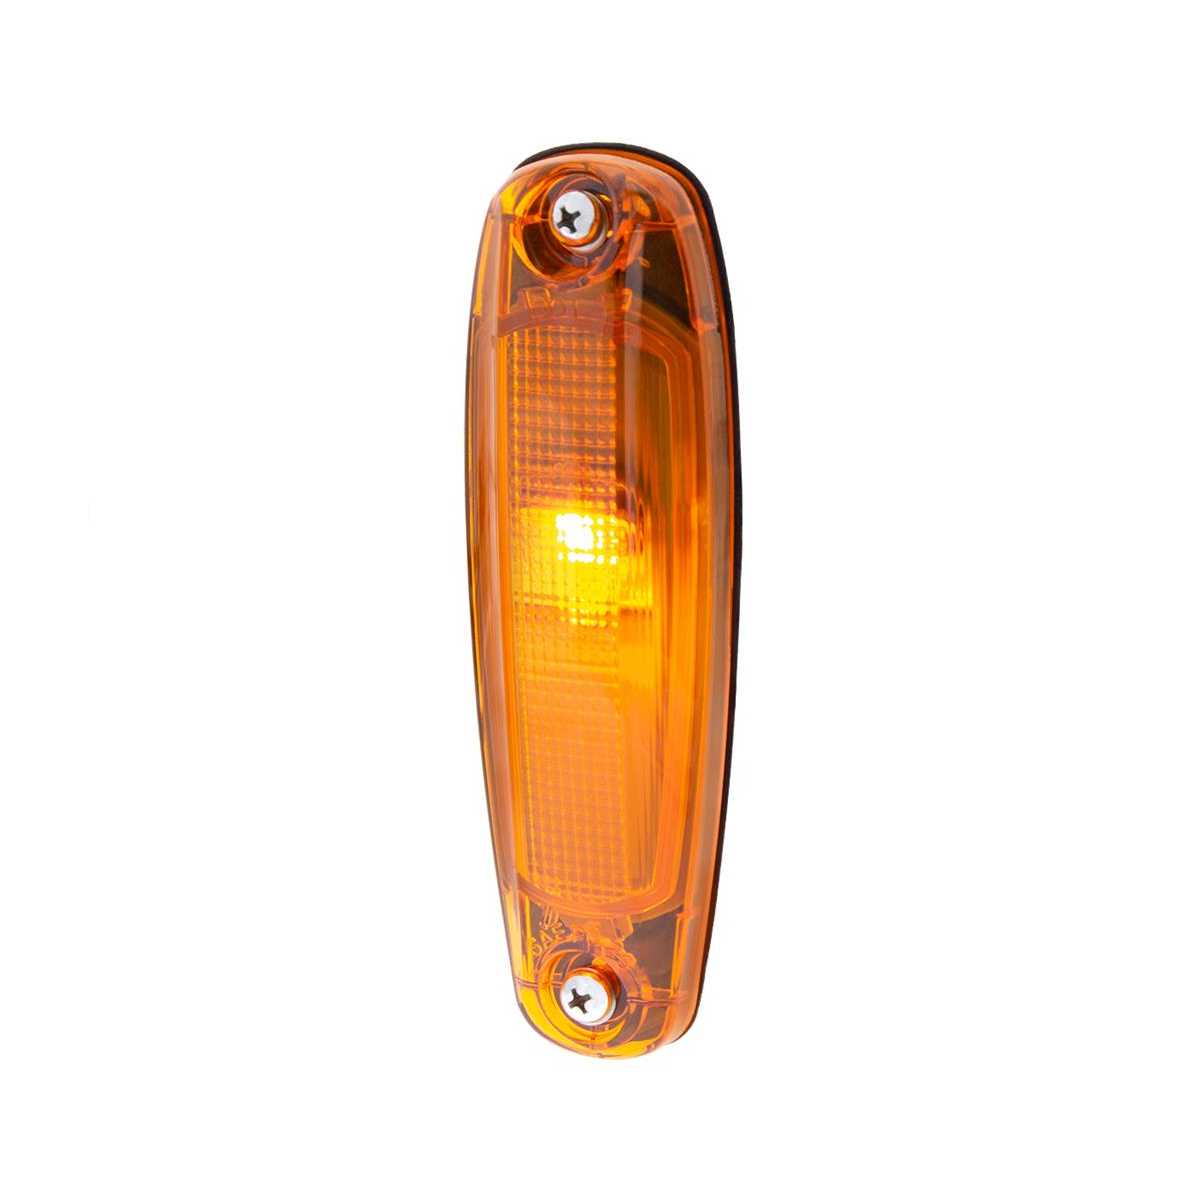 2 Amber LED Cab Light for 2008-2022 Freightliner Cascadia with Amber Lens